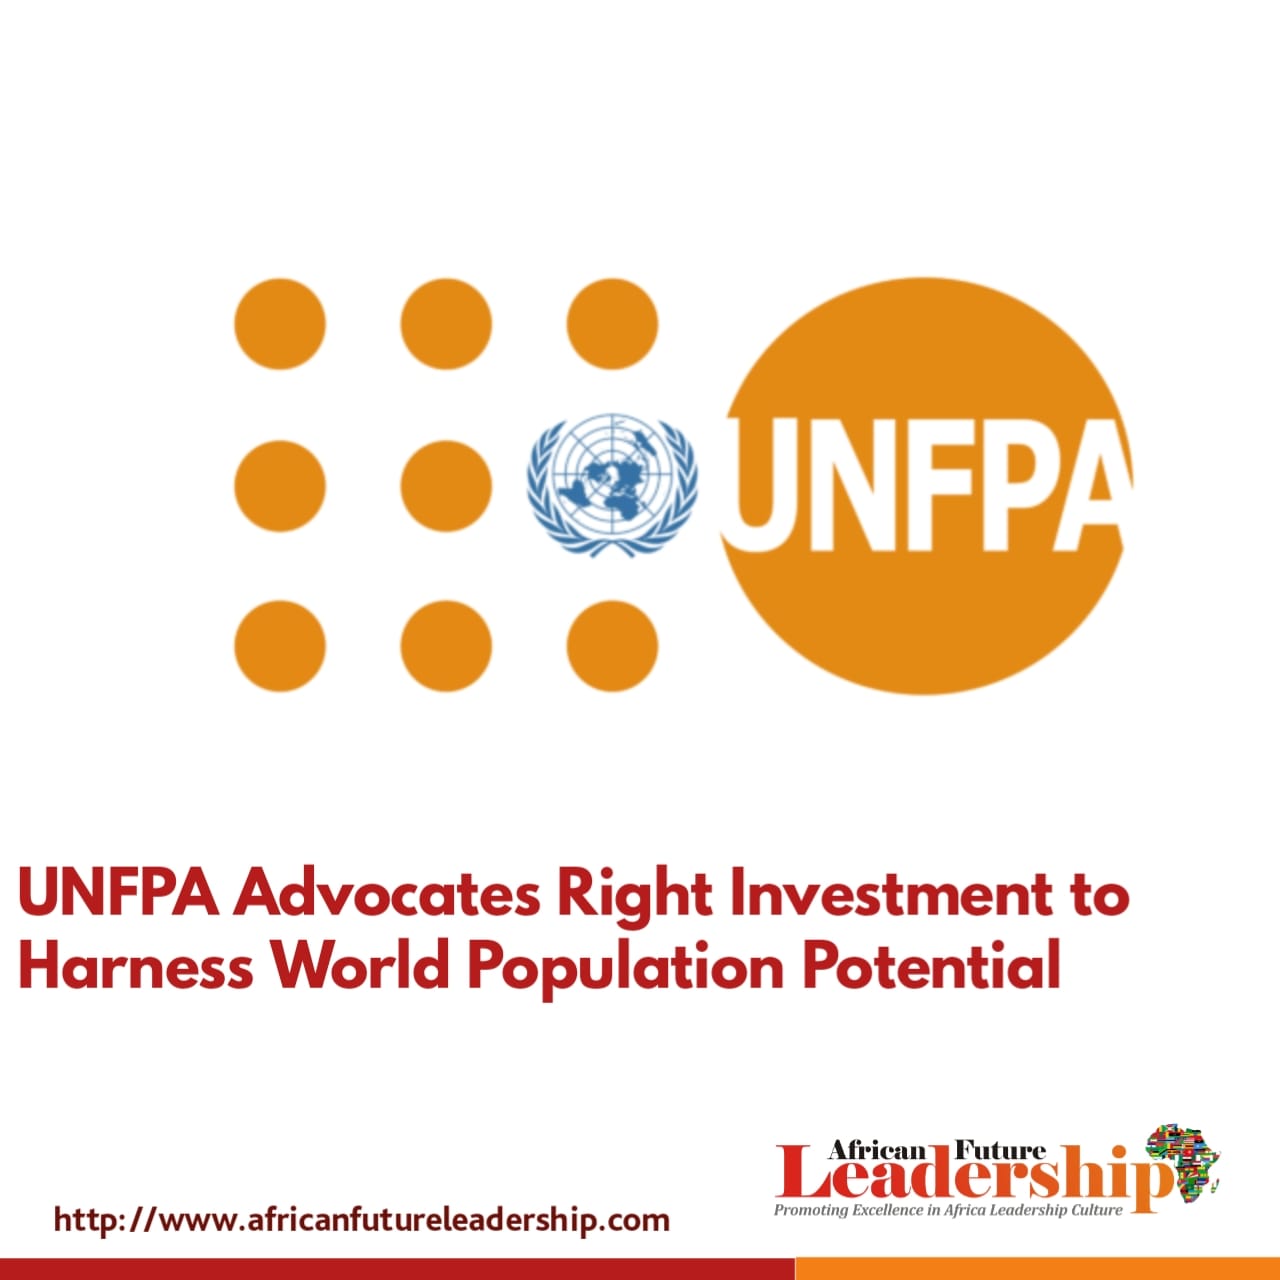 UNFPA Advocates Right Investment to Harness World Population Potential